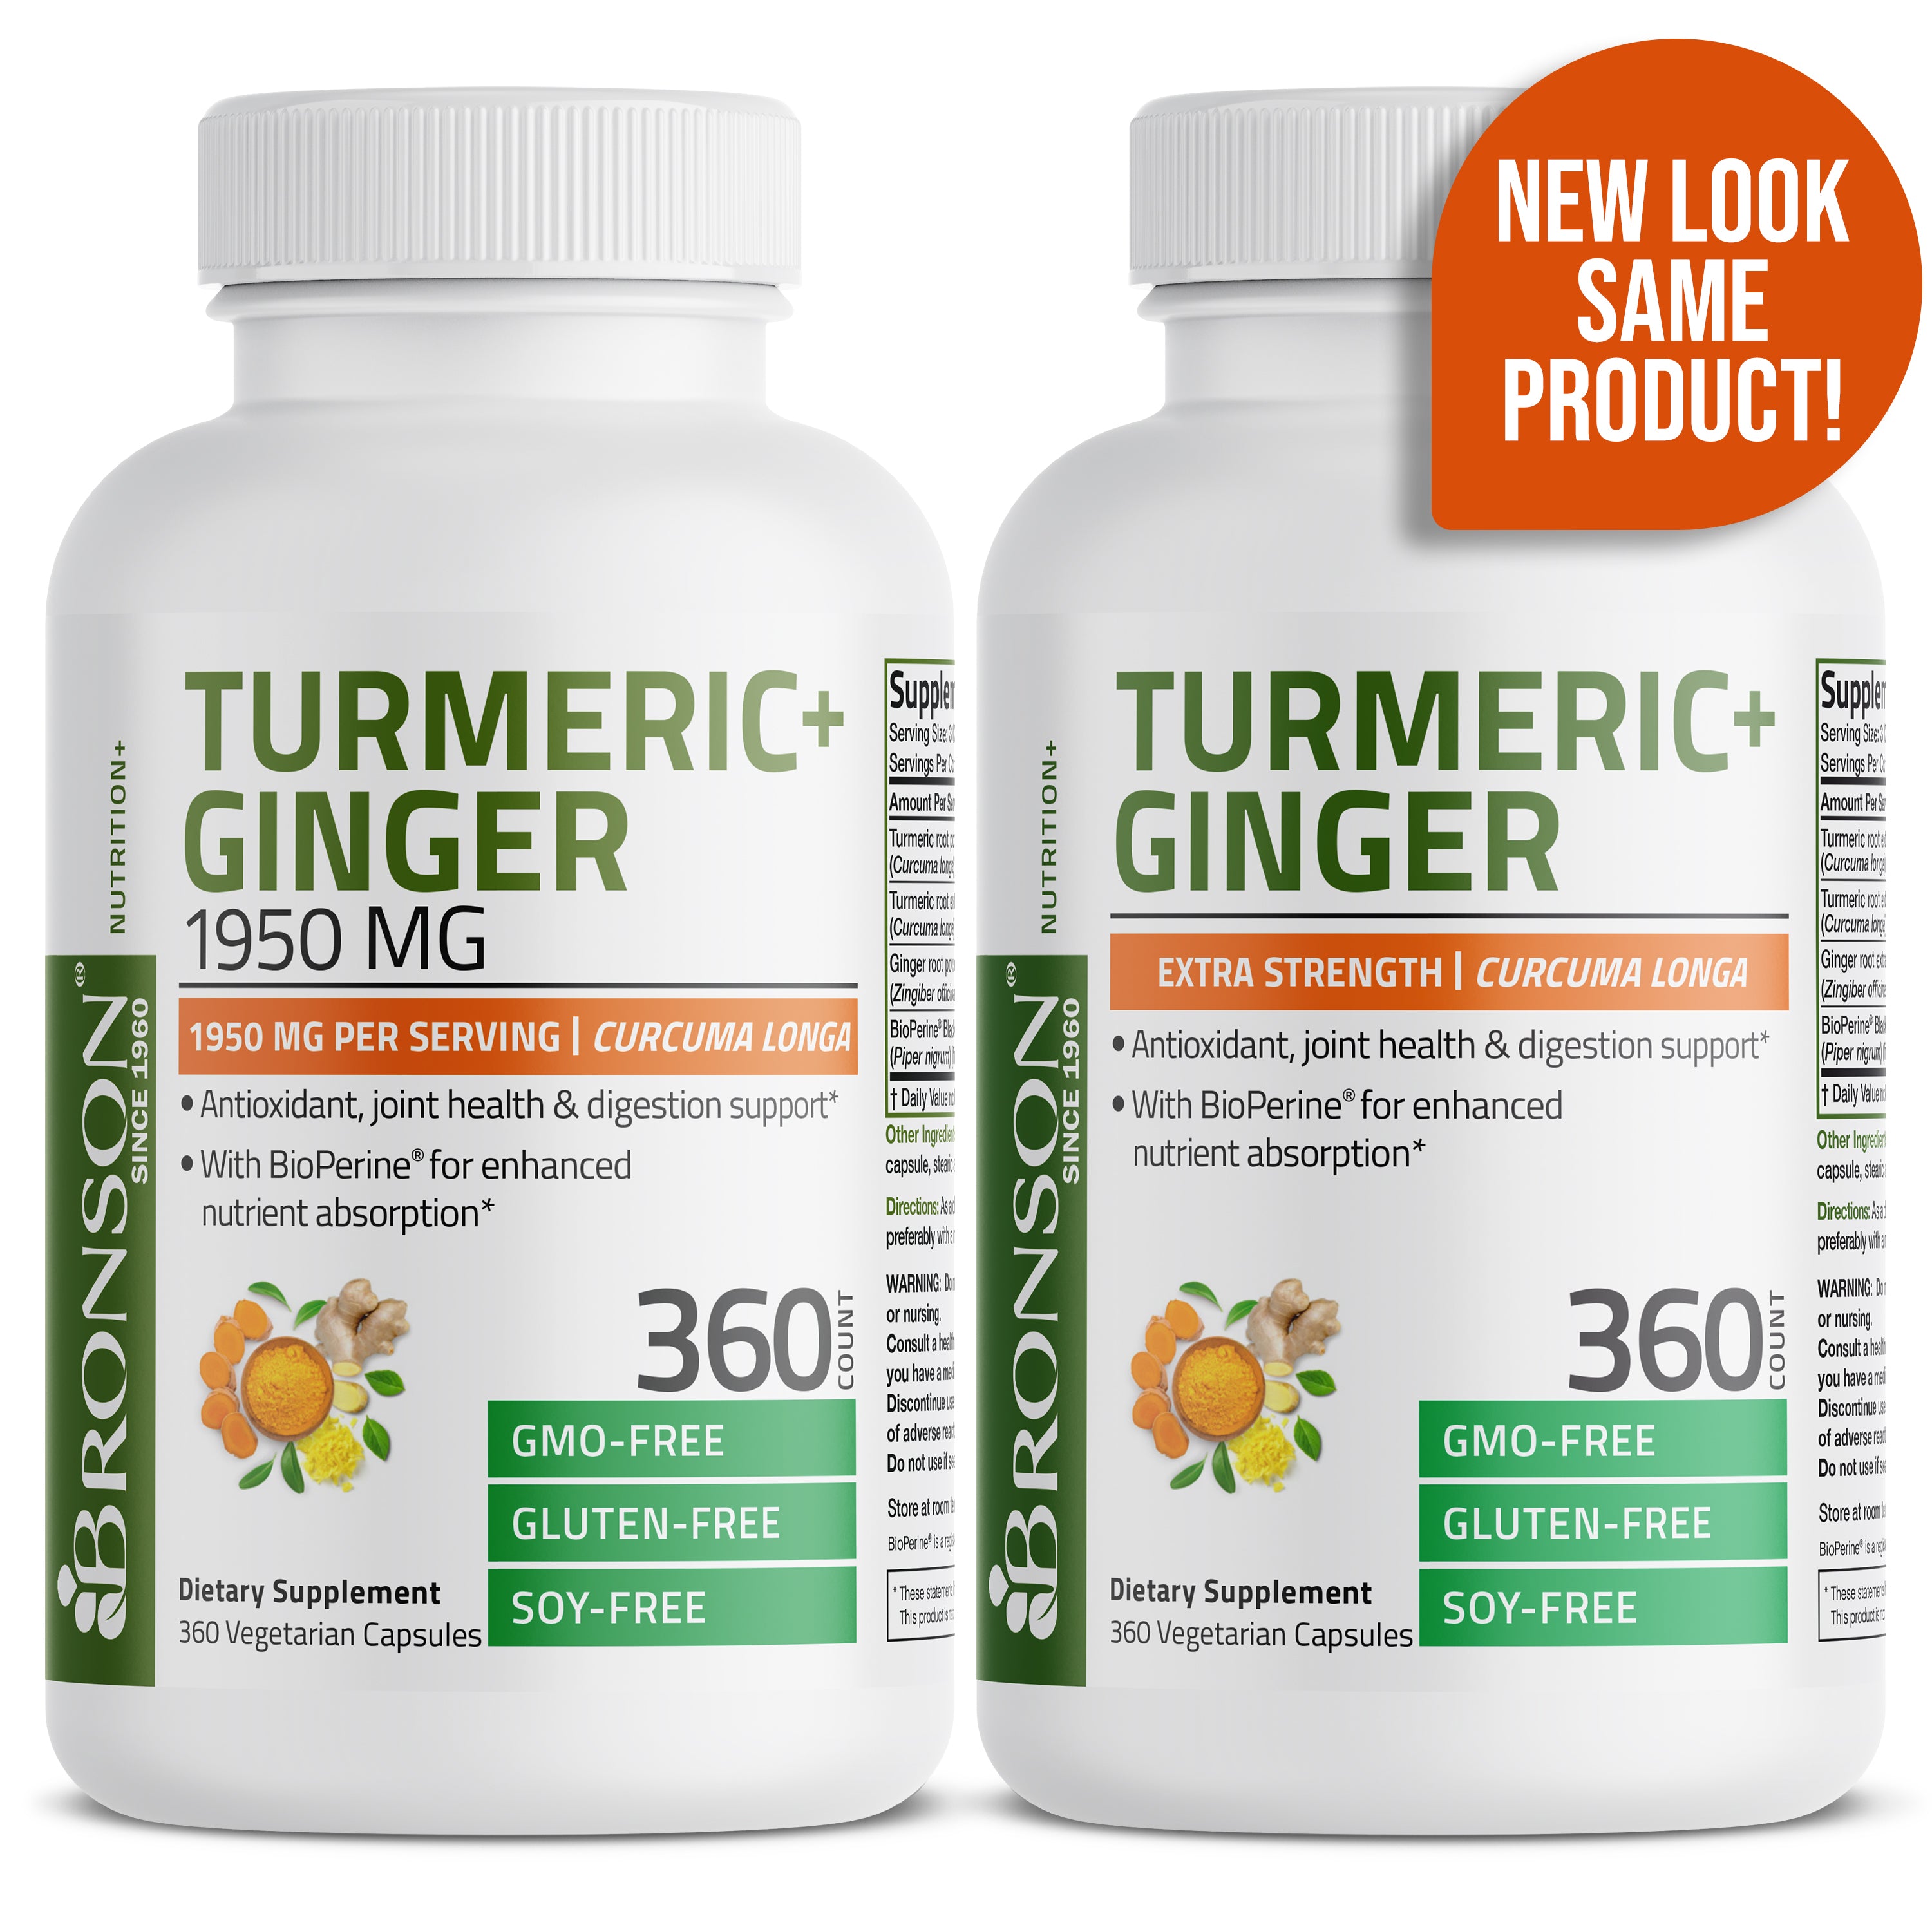 Turmeric + Ginger 1950 MG view 13 of 15